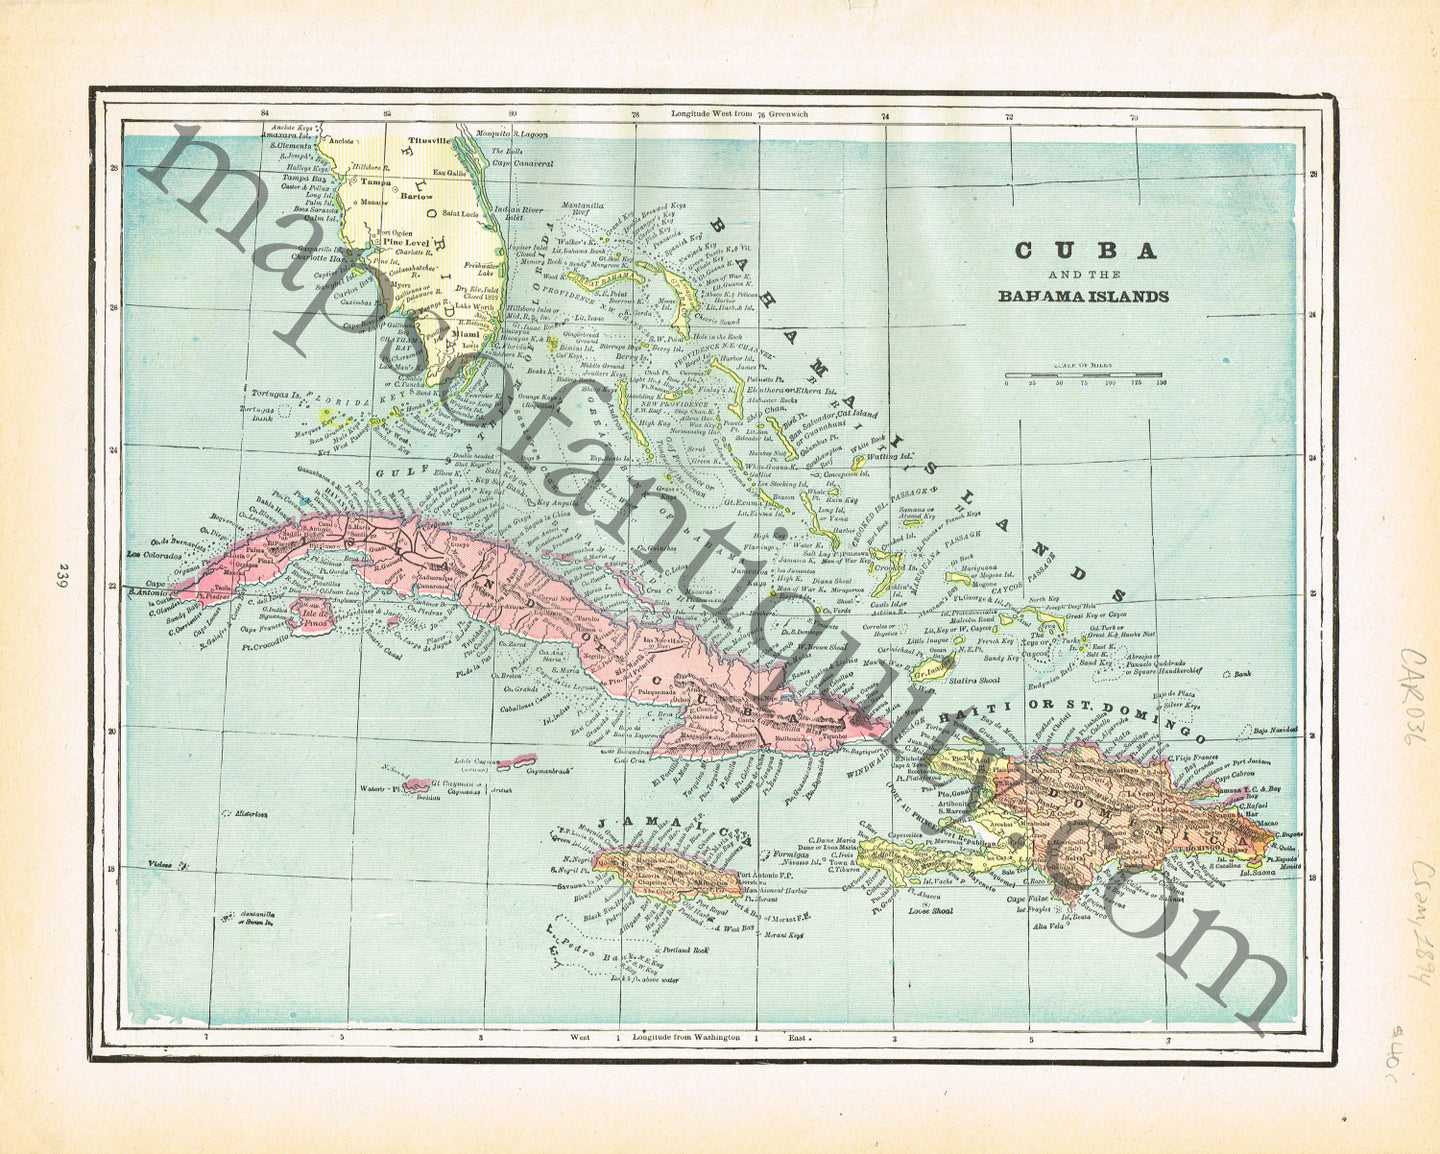 Antique-Printed-Color-Map-Cuba-and-The-Bahama-Islands-verso:-Mexico-Caribbean-&-Latin-America-Caribbean-1894-Cram-Maps-Of-Antiquity